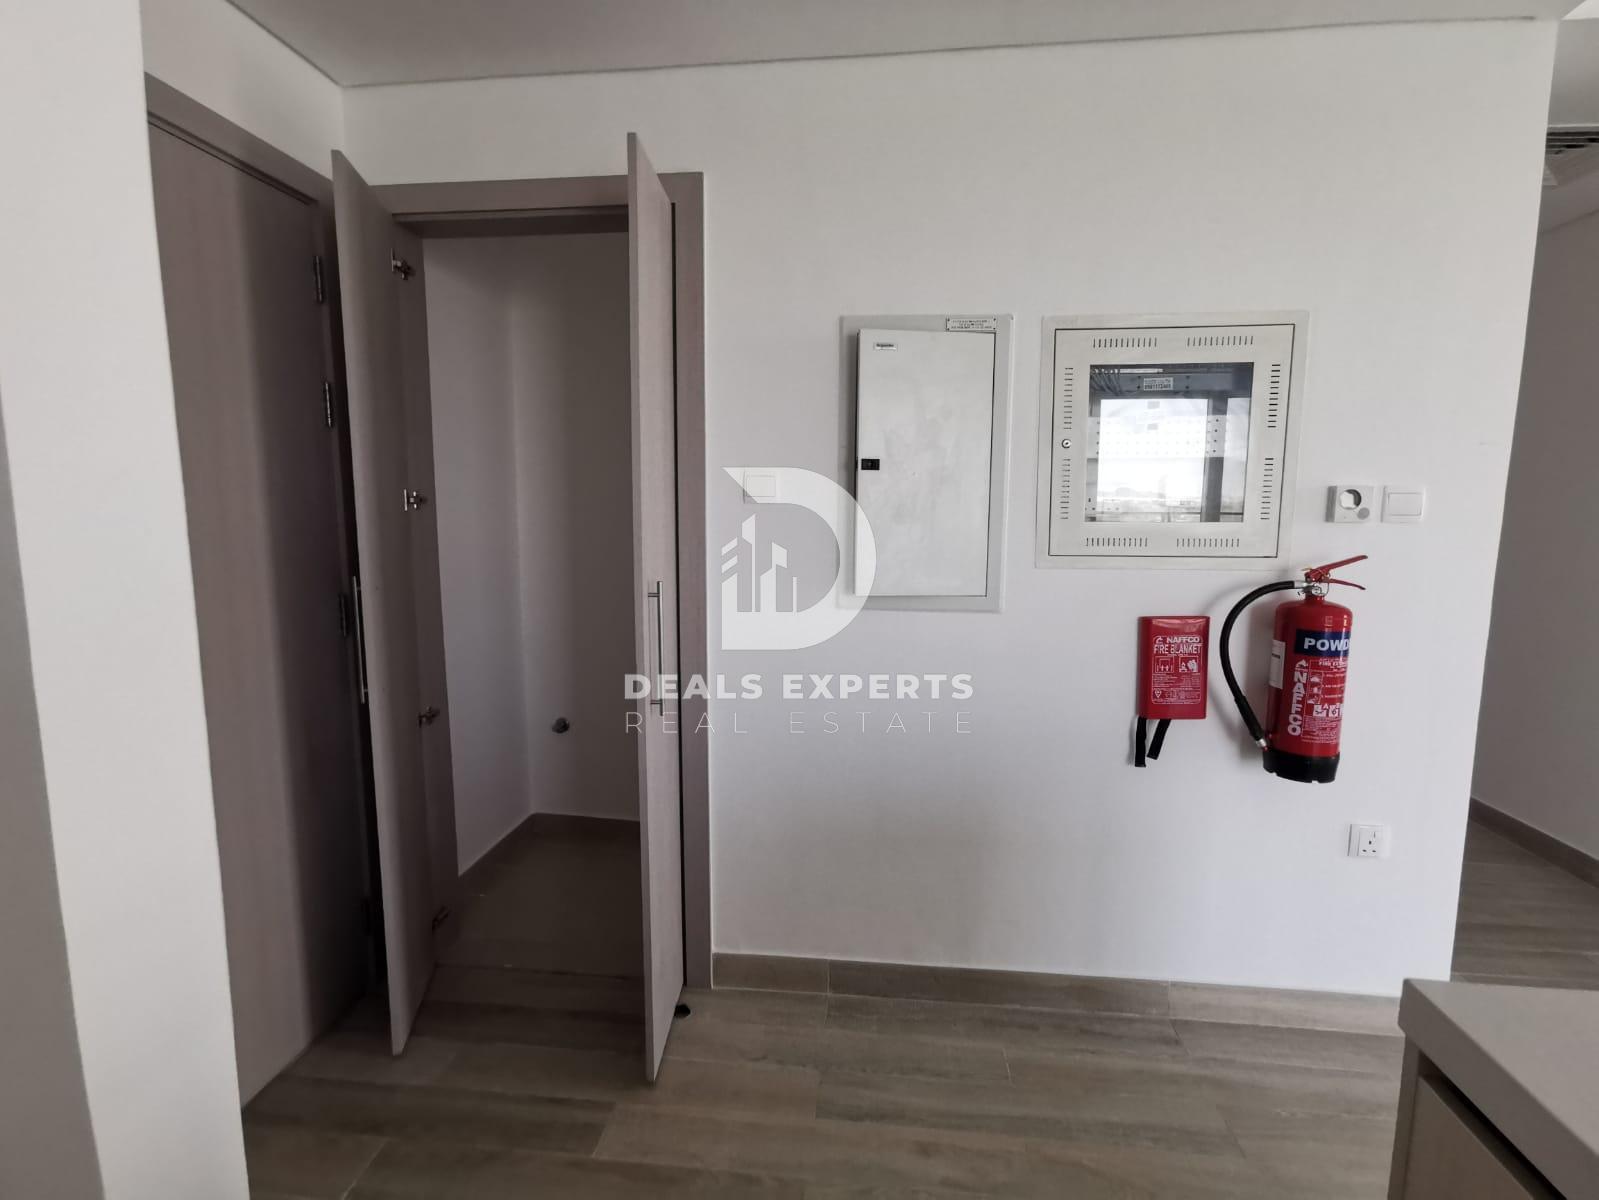 3 bed, 4 bath Apartment for rent in Waters Edge, Yas Island, Abu Dhabi for price AED 130000 yearly 